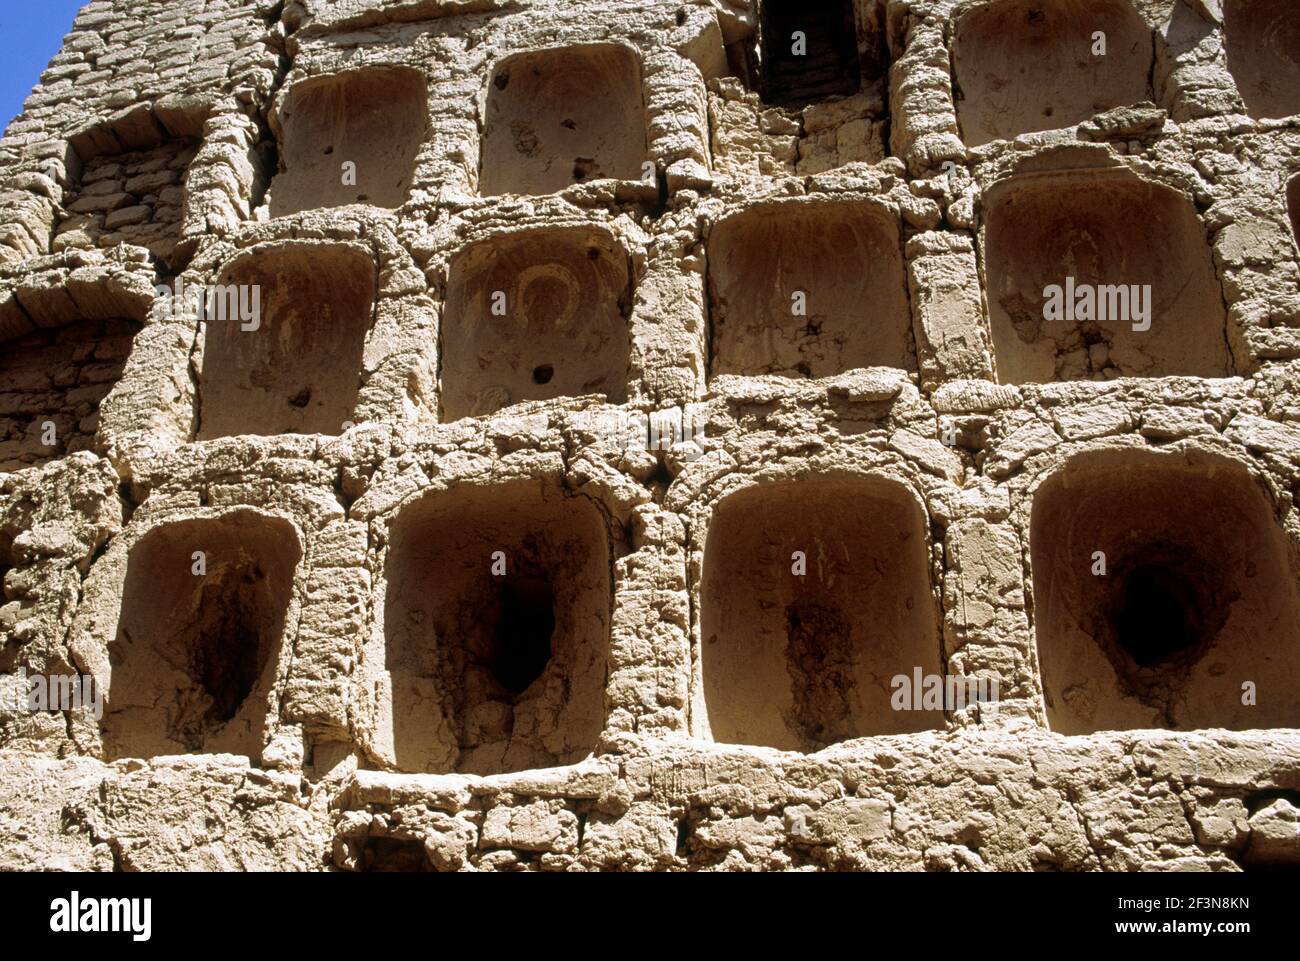 A series of brown stone arches or sconces in the Monastery walls of the ruins of ancient capital of Uigurs, or Uygurs, in the Flaming mountains on the Stock Photo